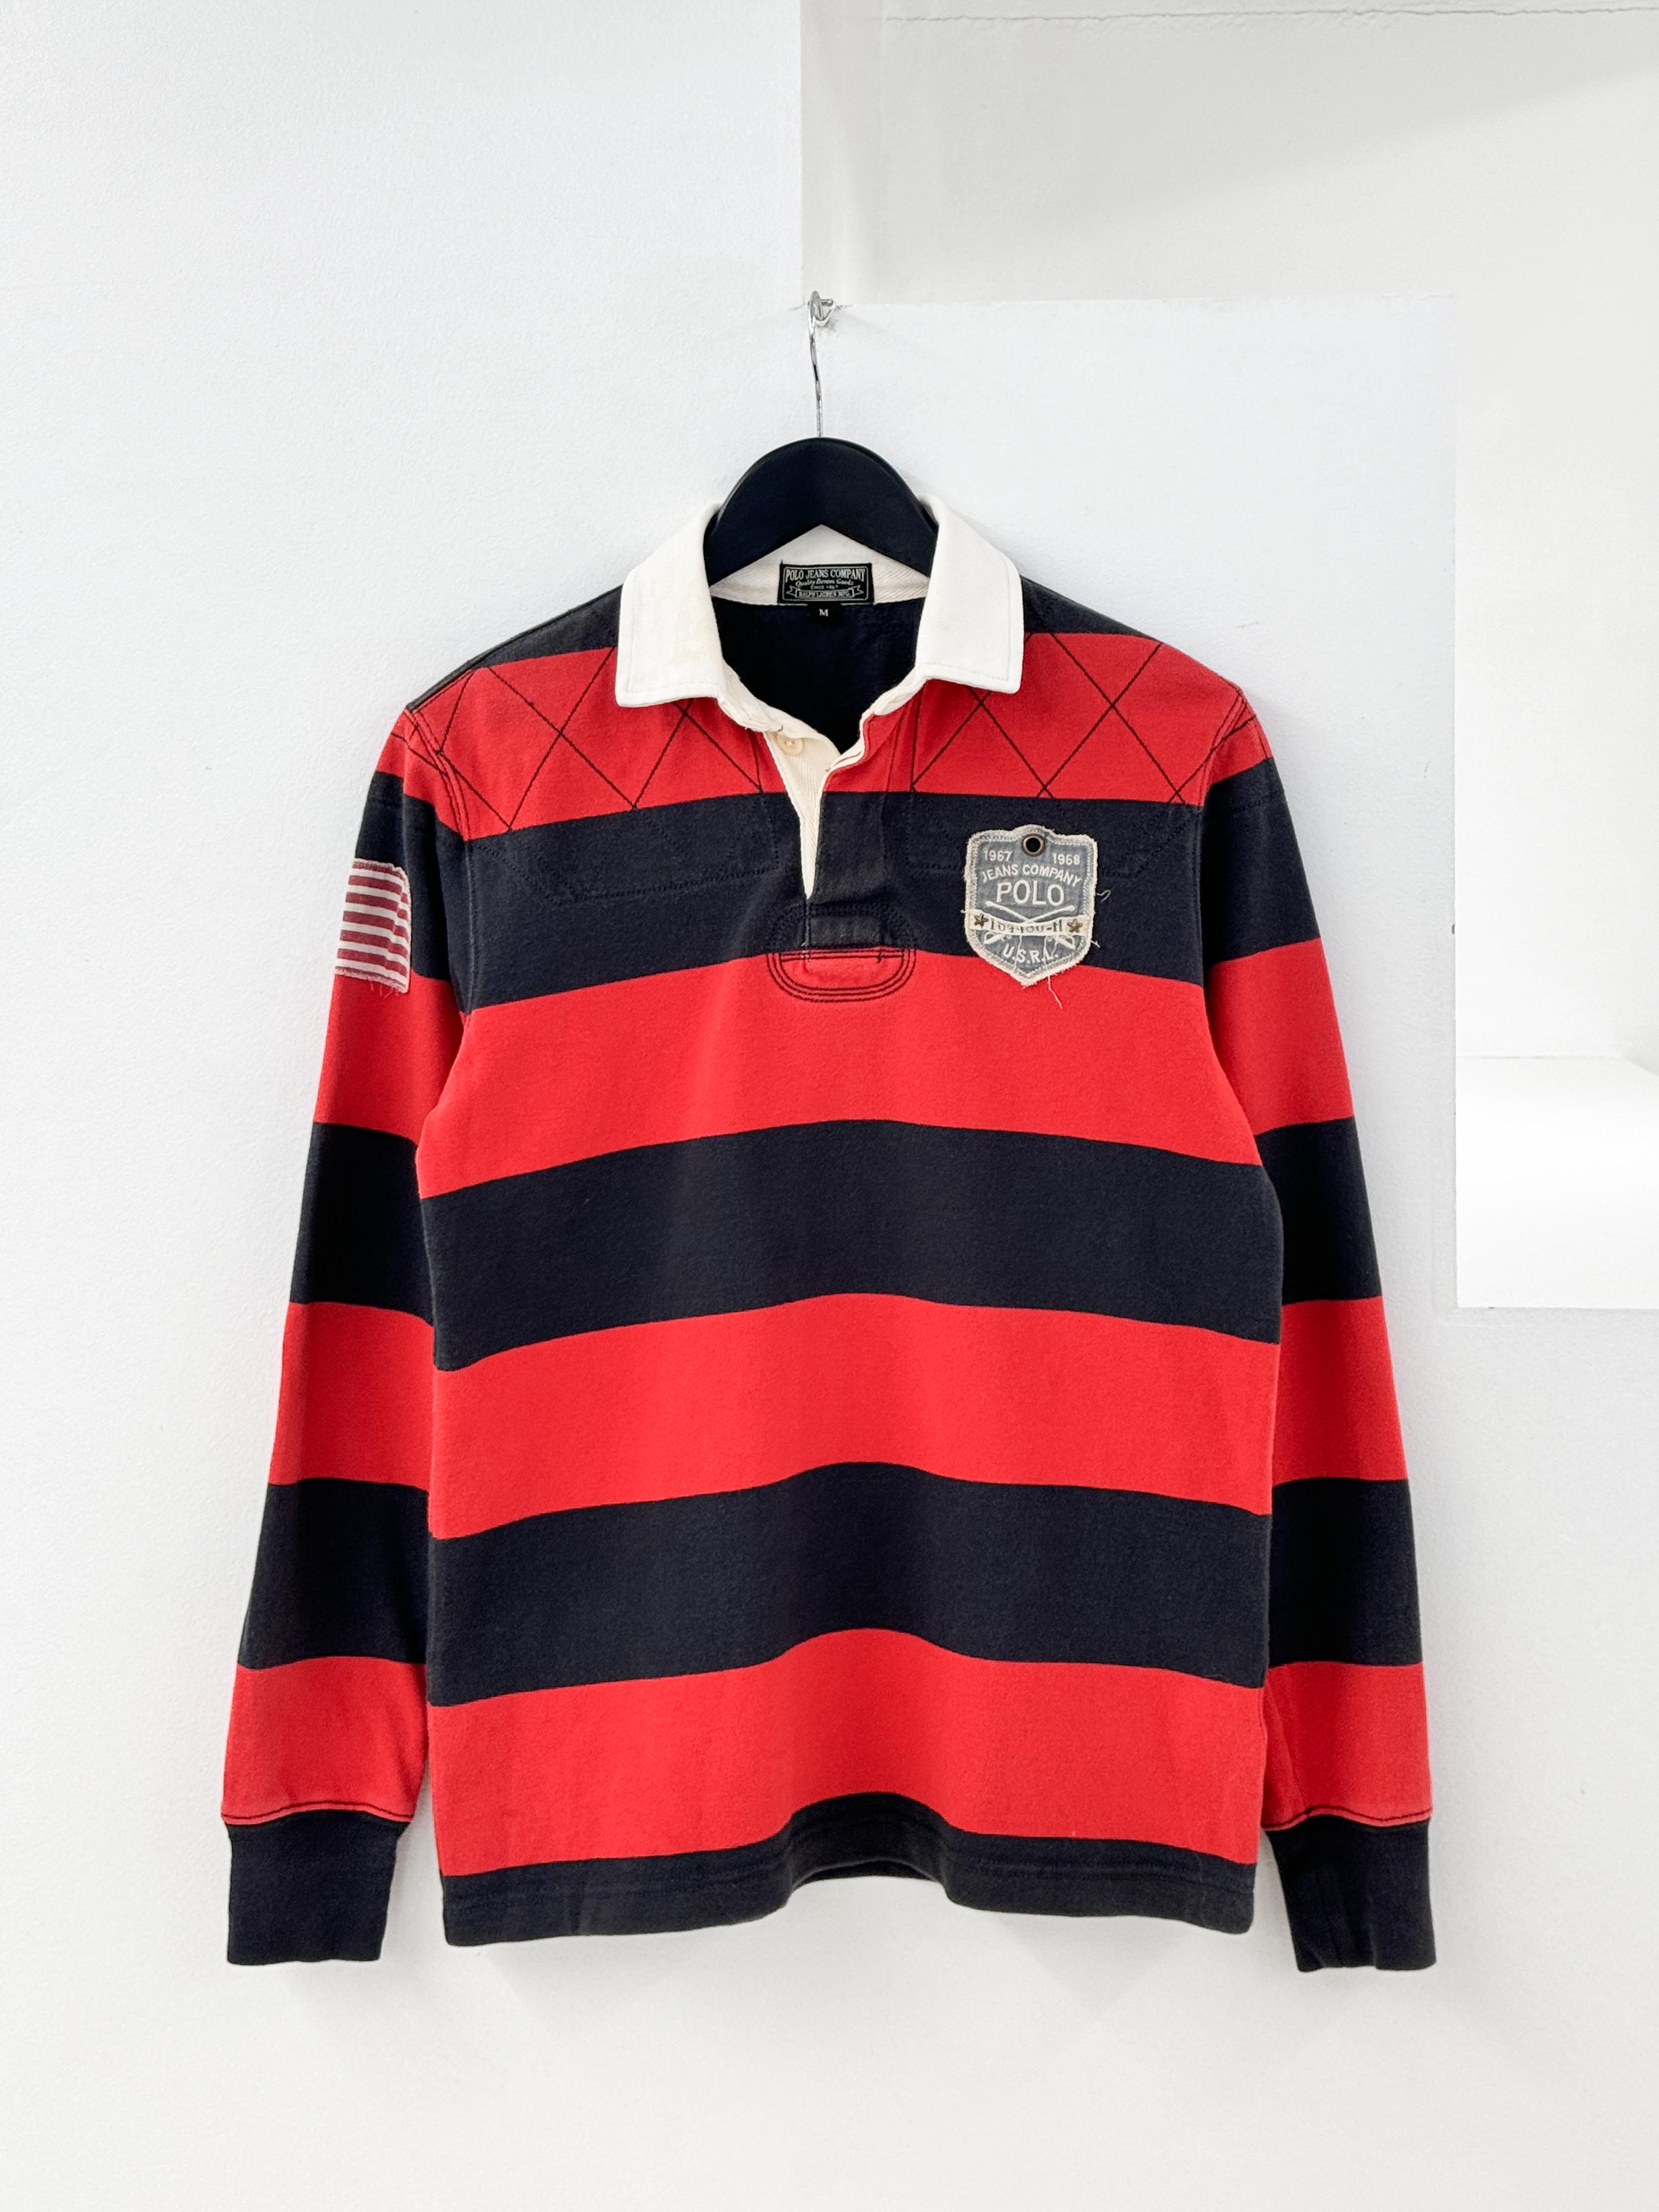 Polo Jeans rugby shirt